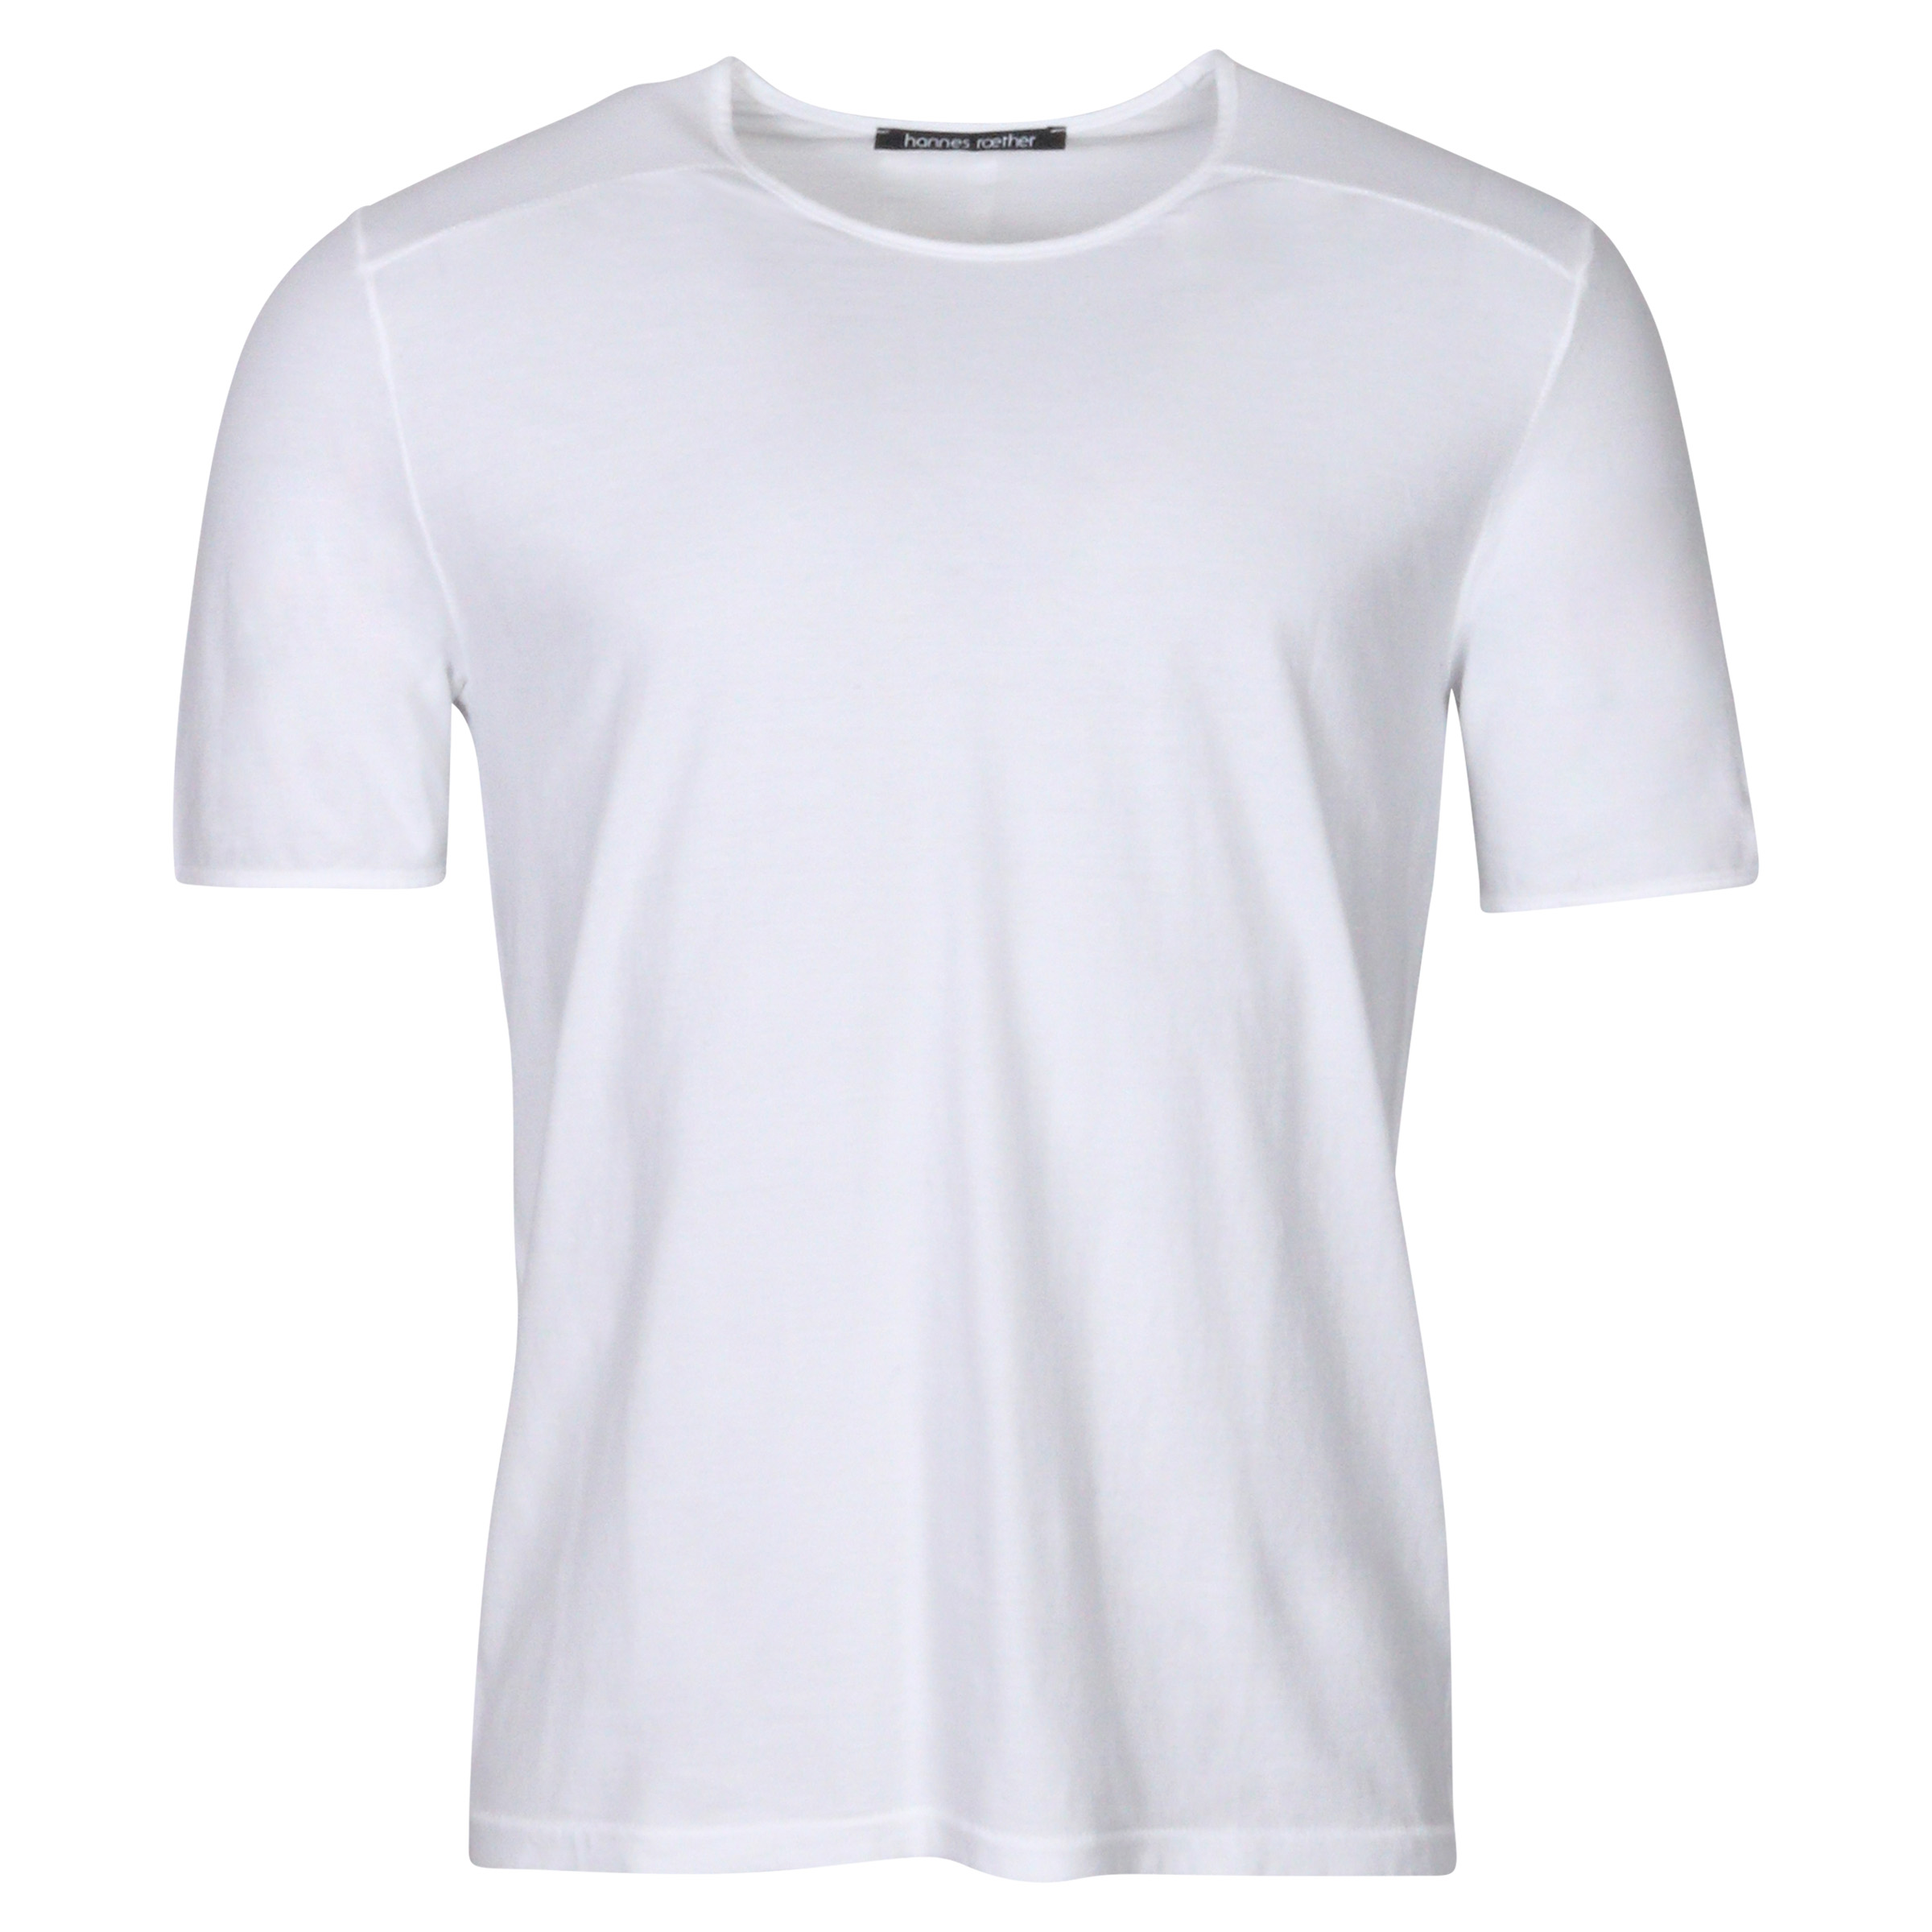 Hannes Roether T-Shirt White M